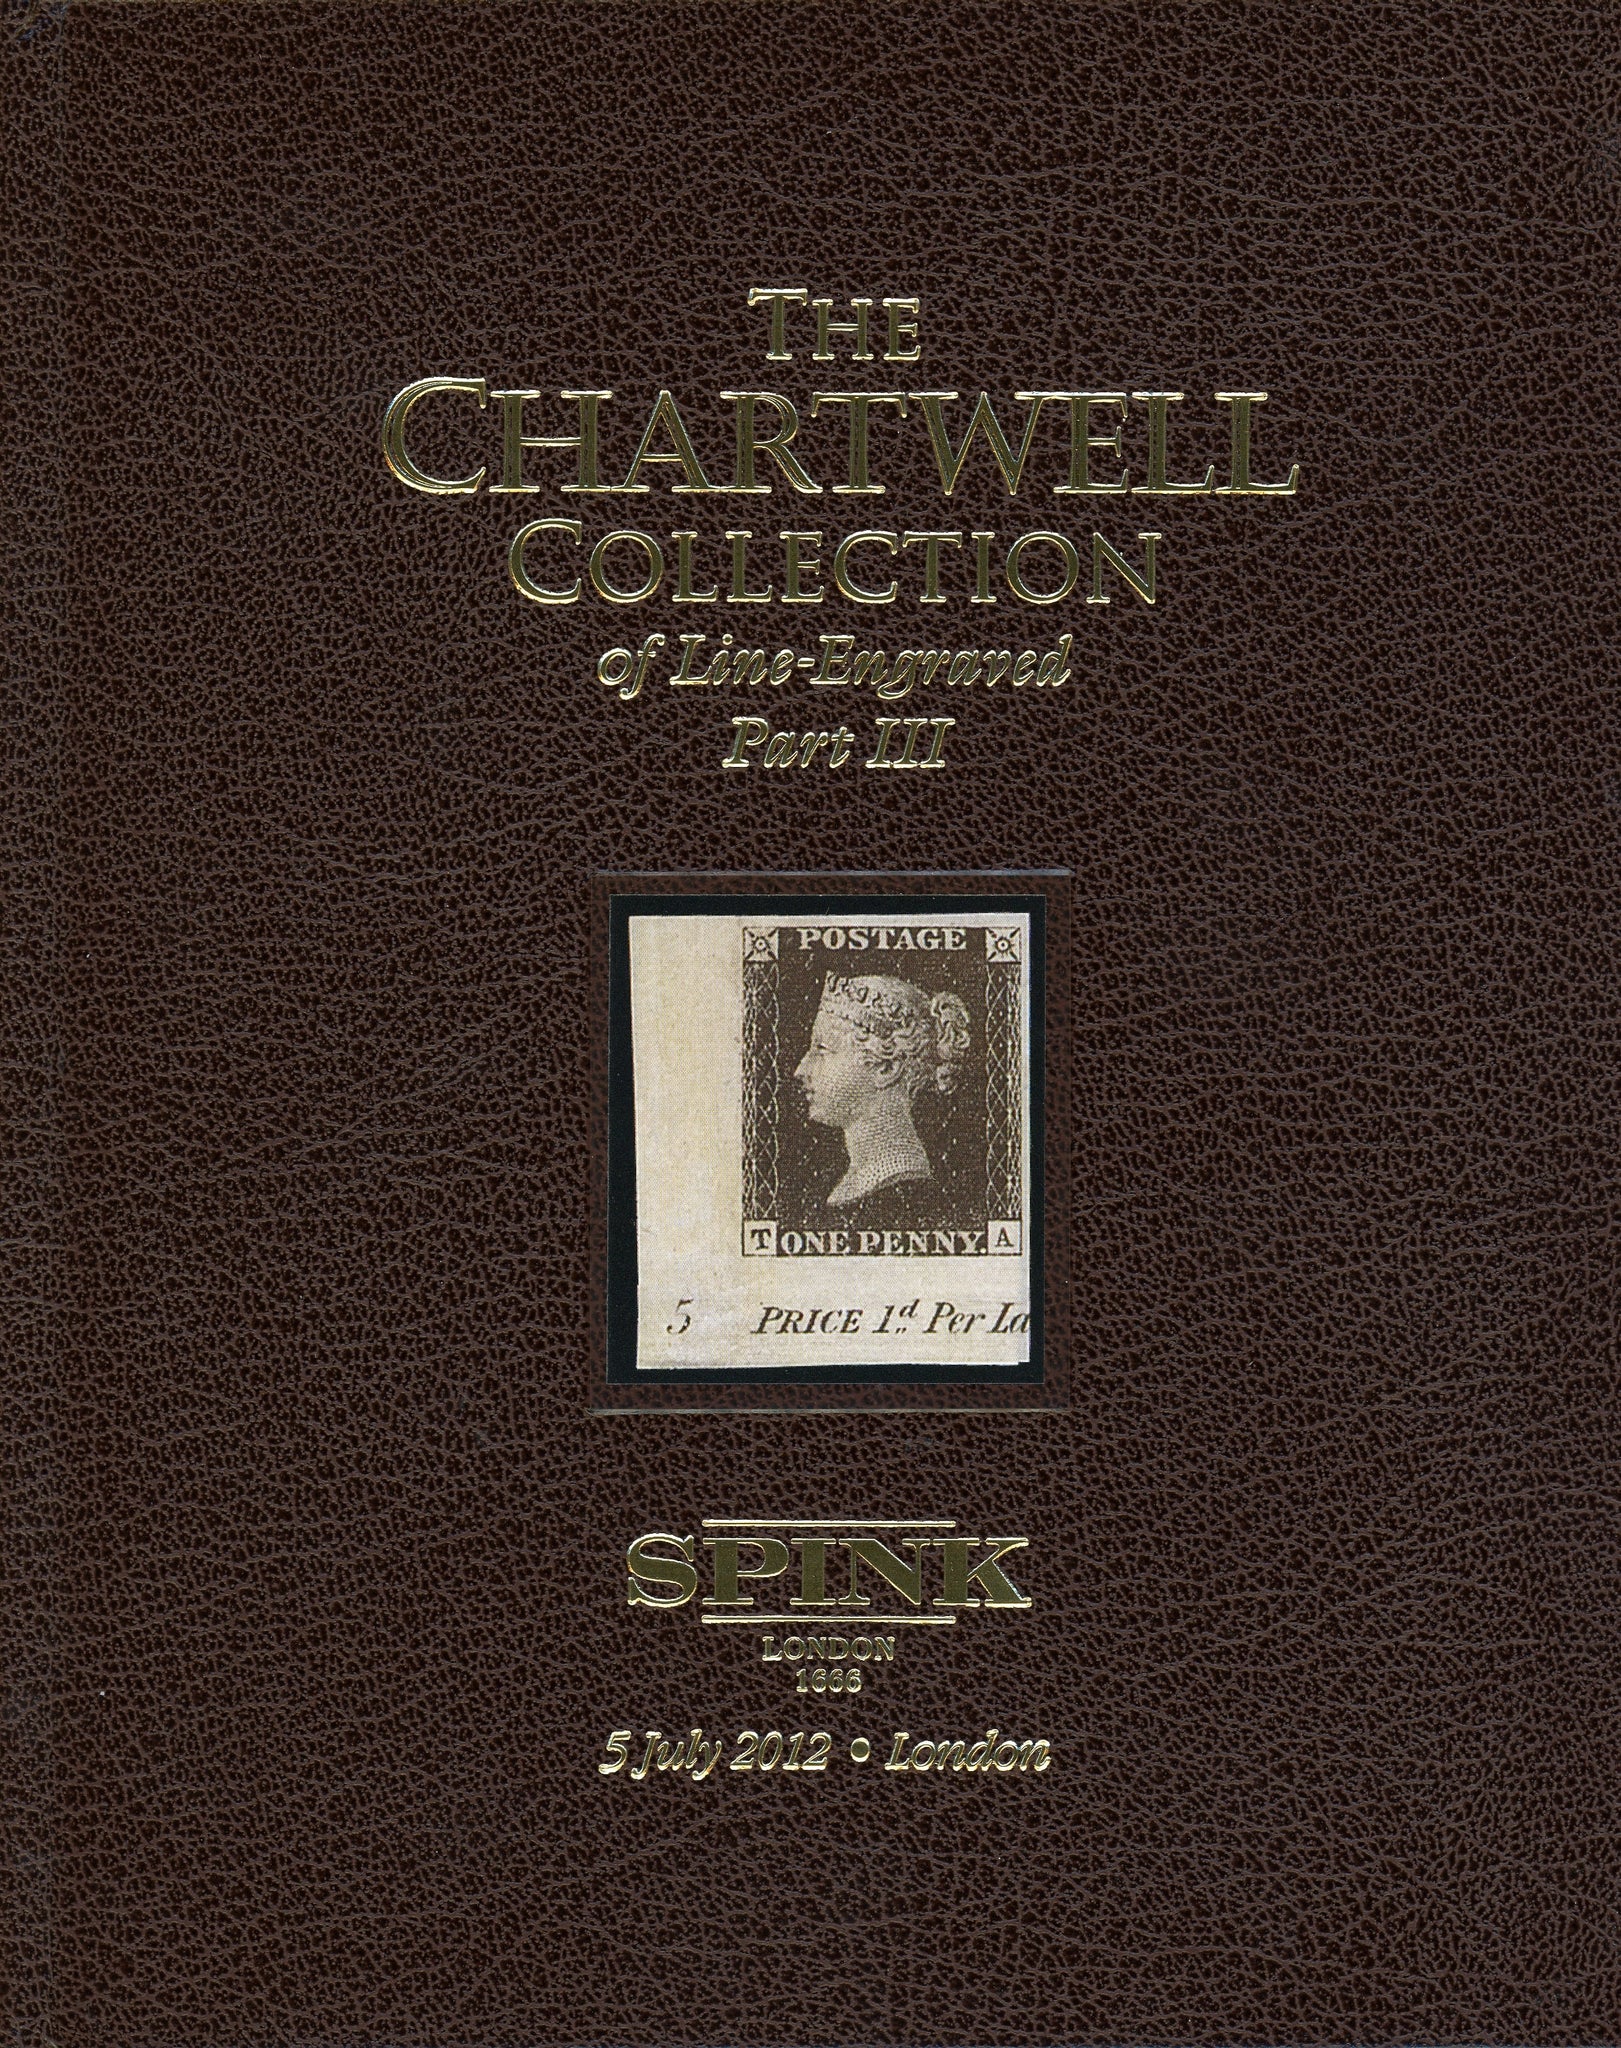 The Chartwell Collection of Line Engraved Part III Vol 7 - 5 July 2012 Spink London